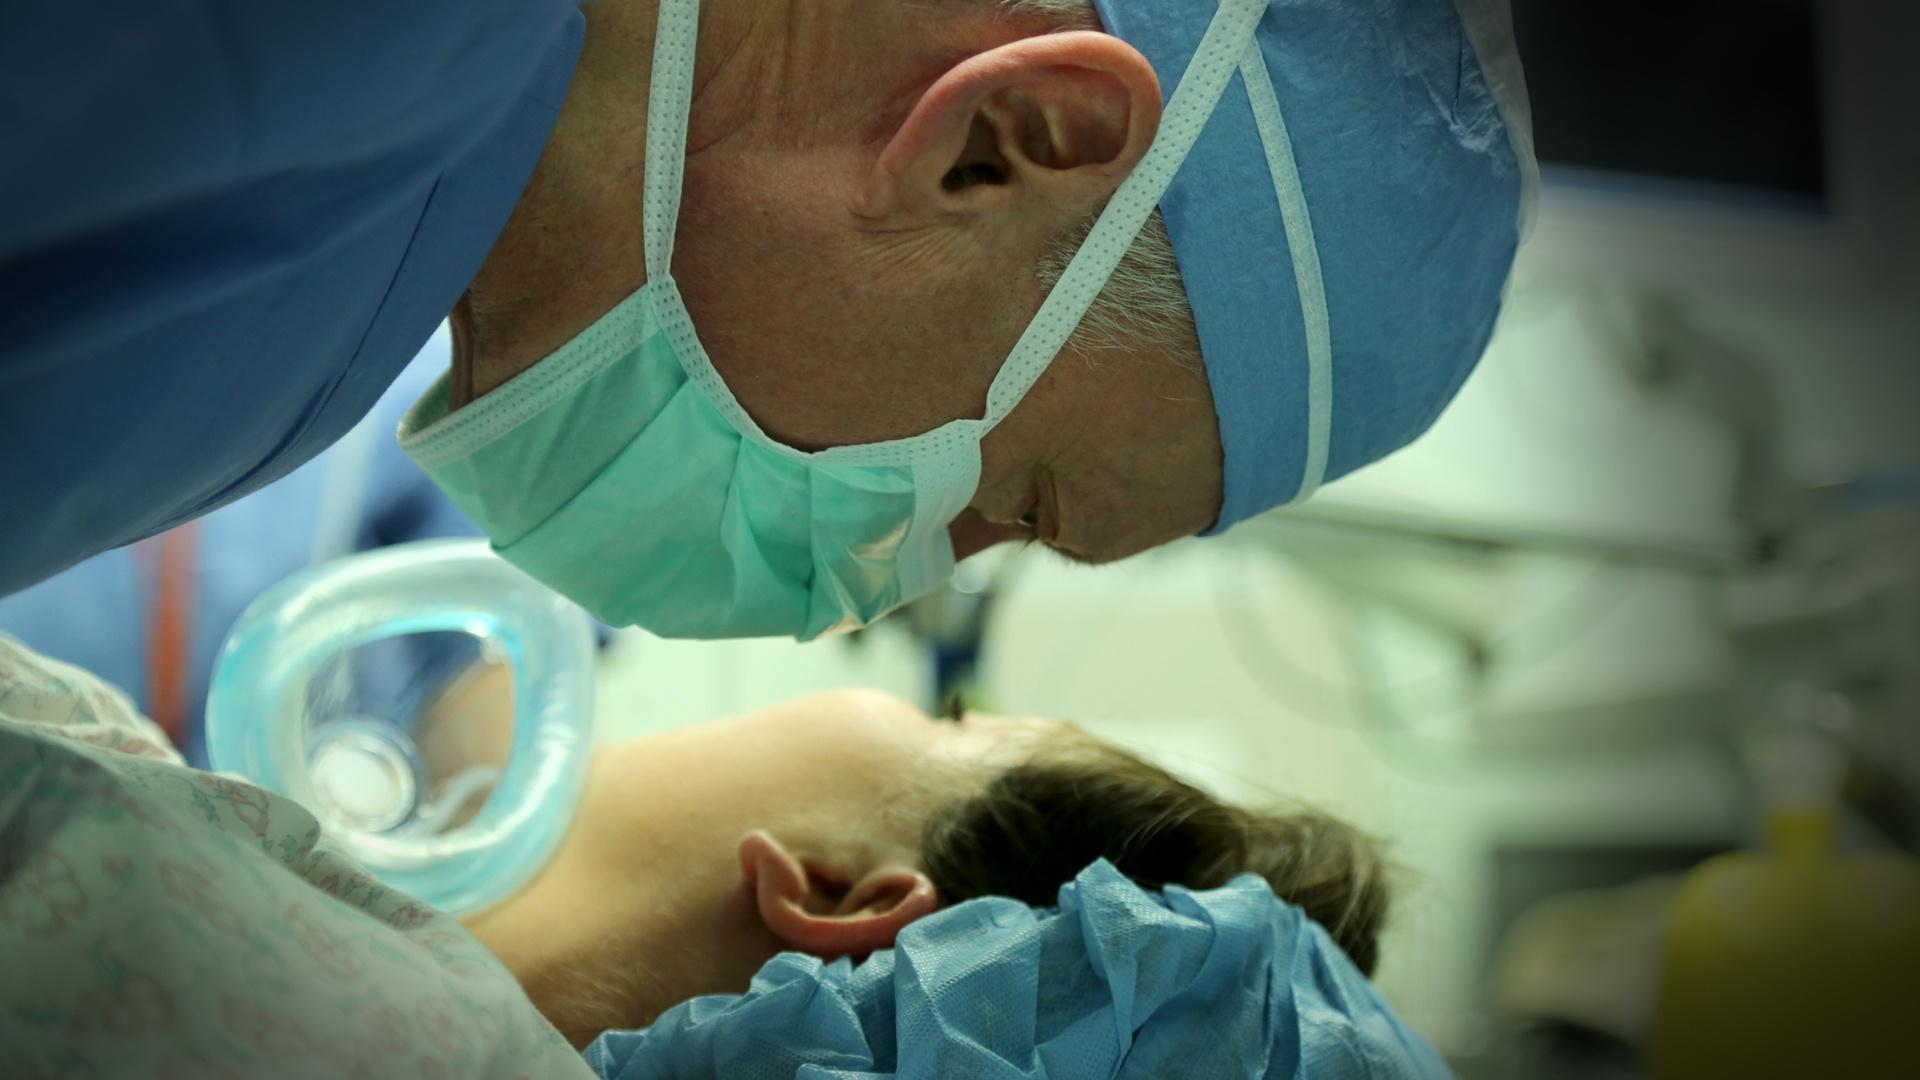 Dr. N. Scob Adzick wakes a patient after fetal surgery.